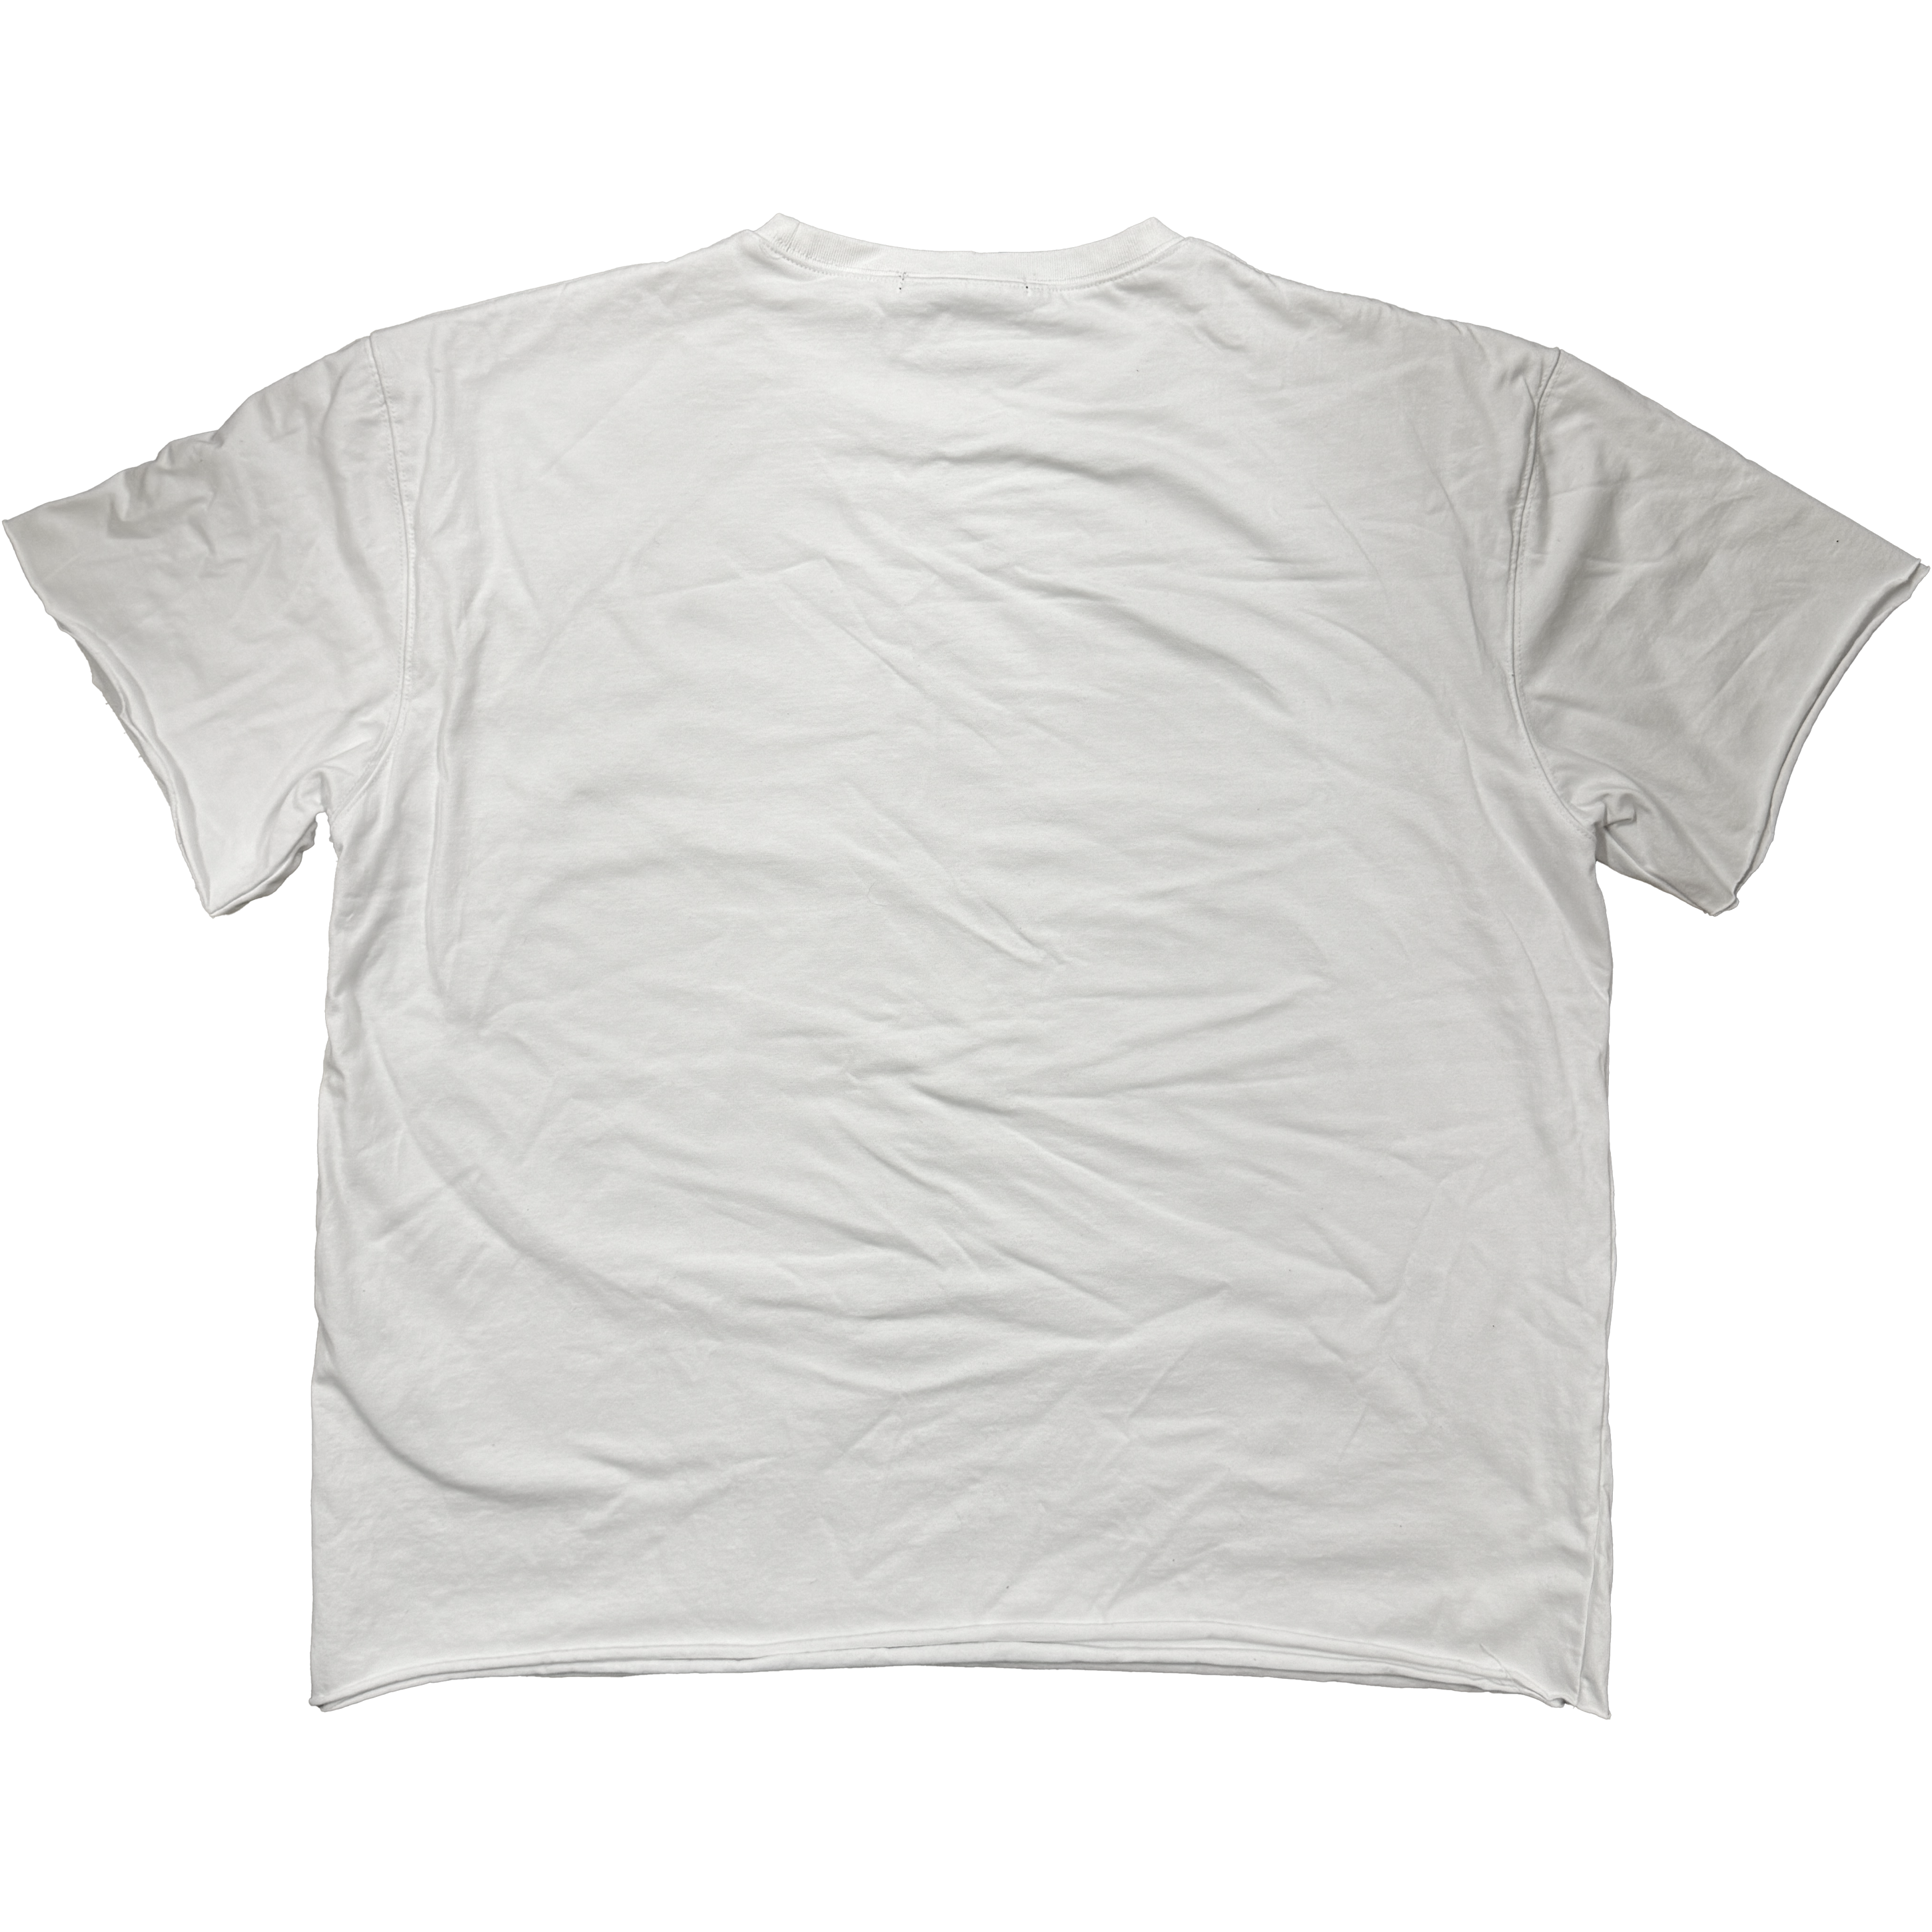 (A) 2-LAYER [360GSM] BLANK TEE